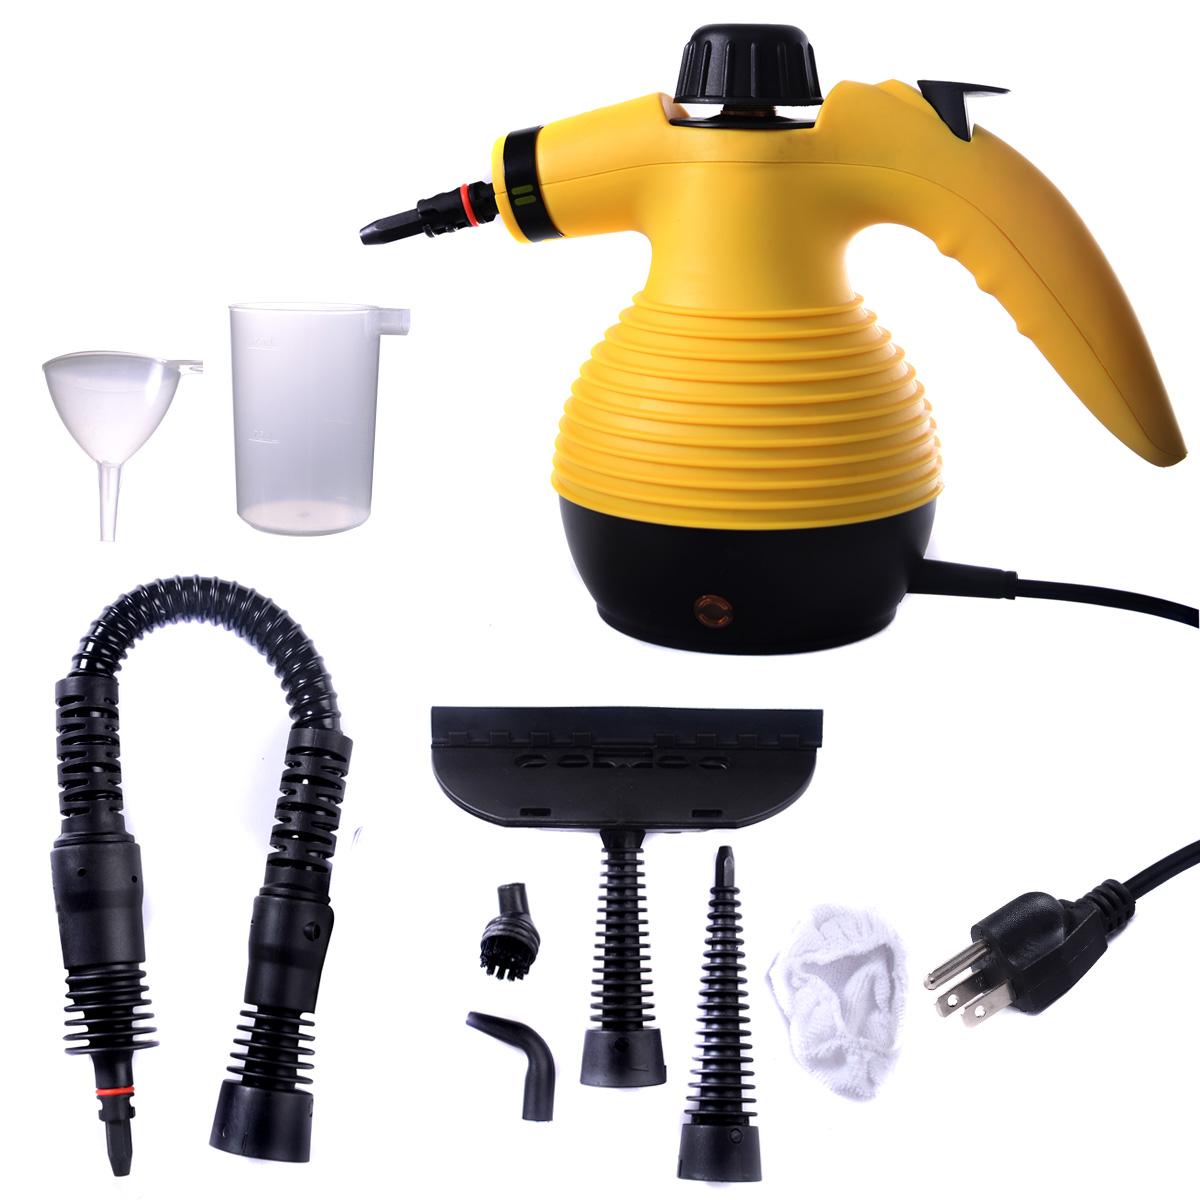 Handheld Pressurized Steam Cleaner with 9-Piece Accessory Set, Multifunctional Steam Cleaning for Car, Home, Bedroom, Chemical-Free, Yellow